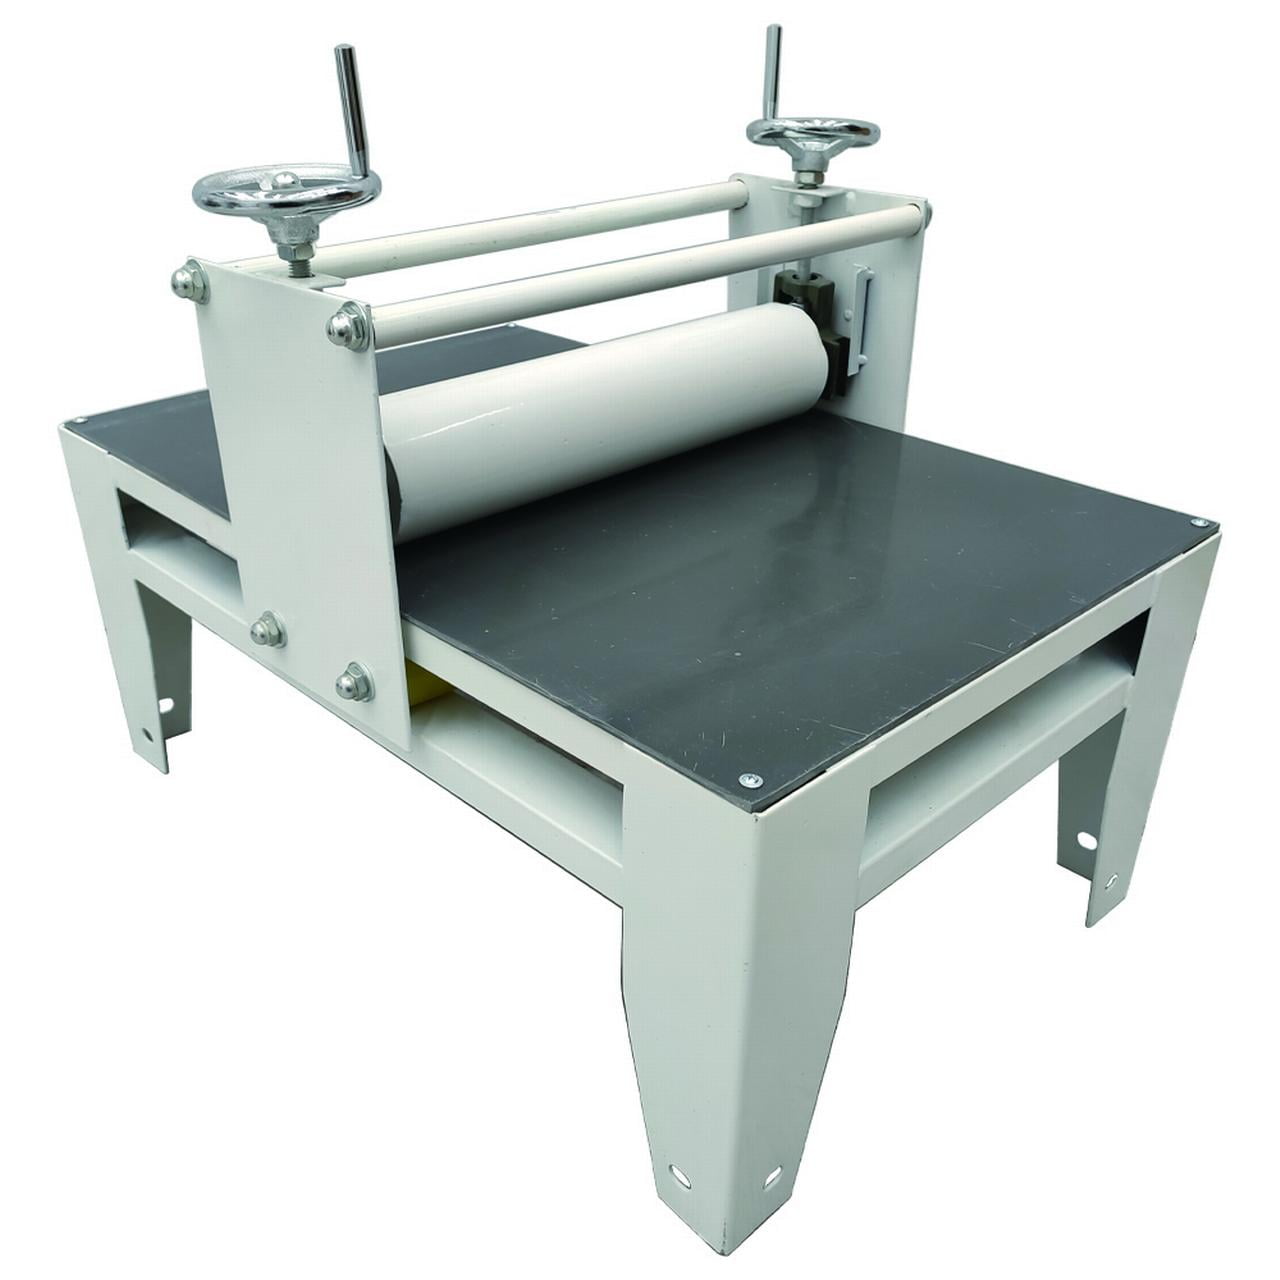 Techtongda Ceramic Clay Plate Machine Slab Roller for Clay& Heavy Duty  Hand-Cut Table Top Adjustable No Shims